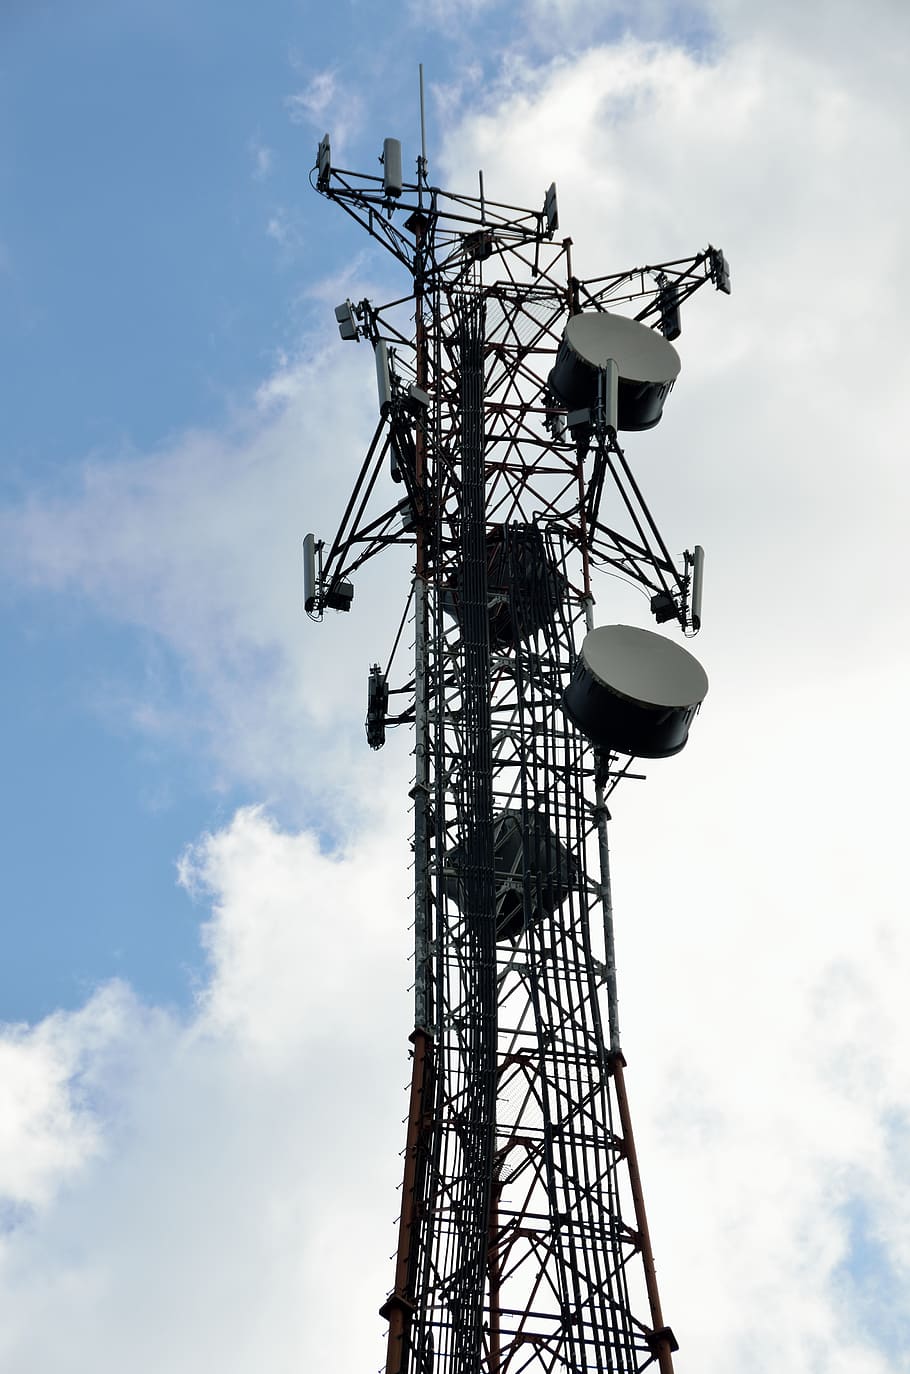 microwave tower, communication, tower, microwave, radio, antenna, mobile, telecommunication, technology, broadcasting